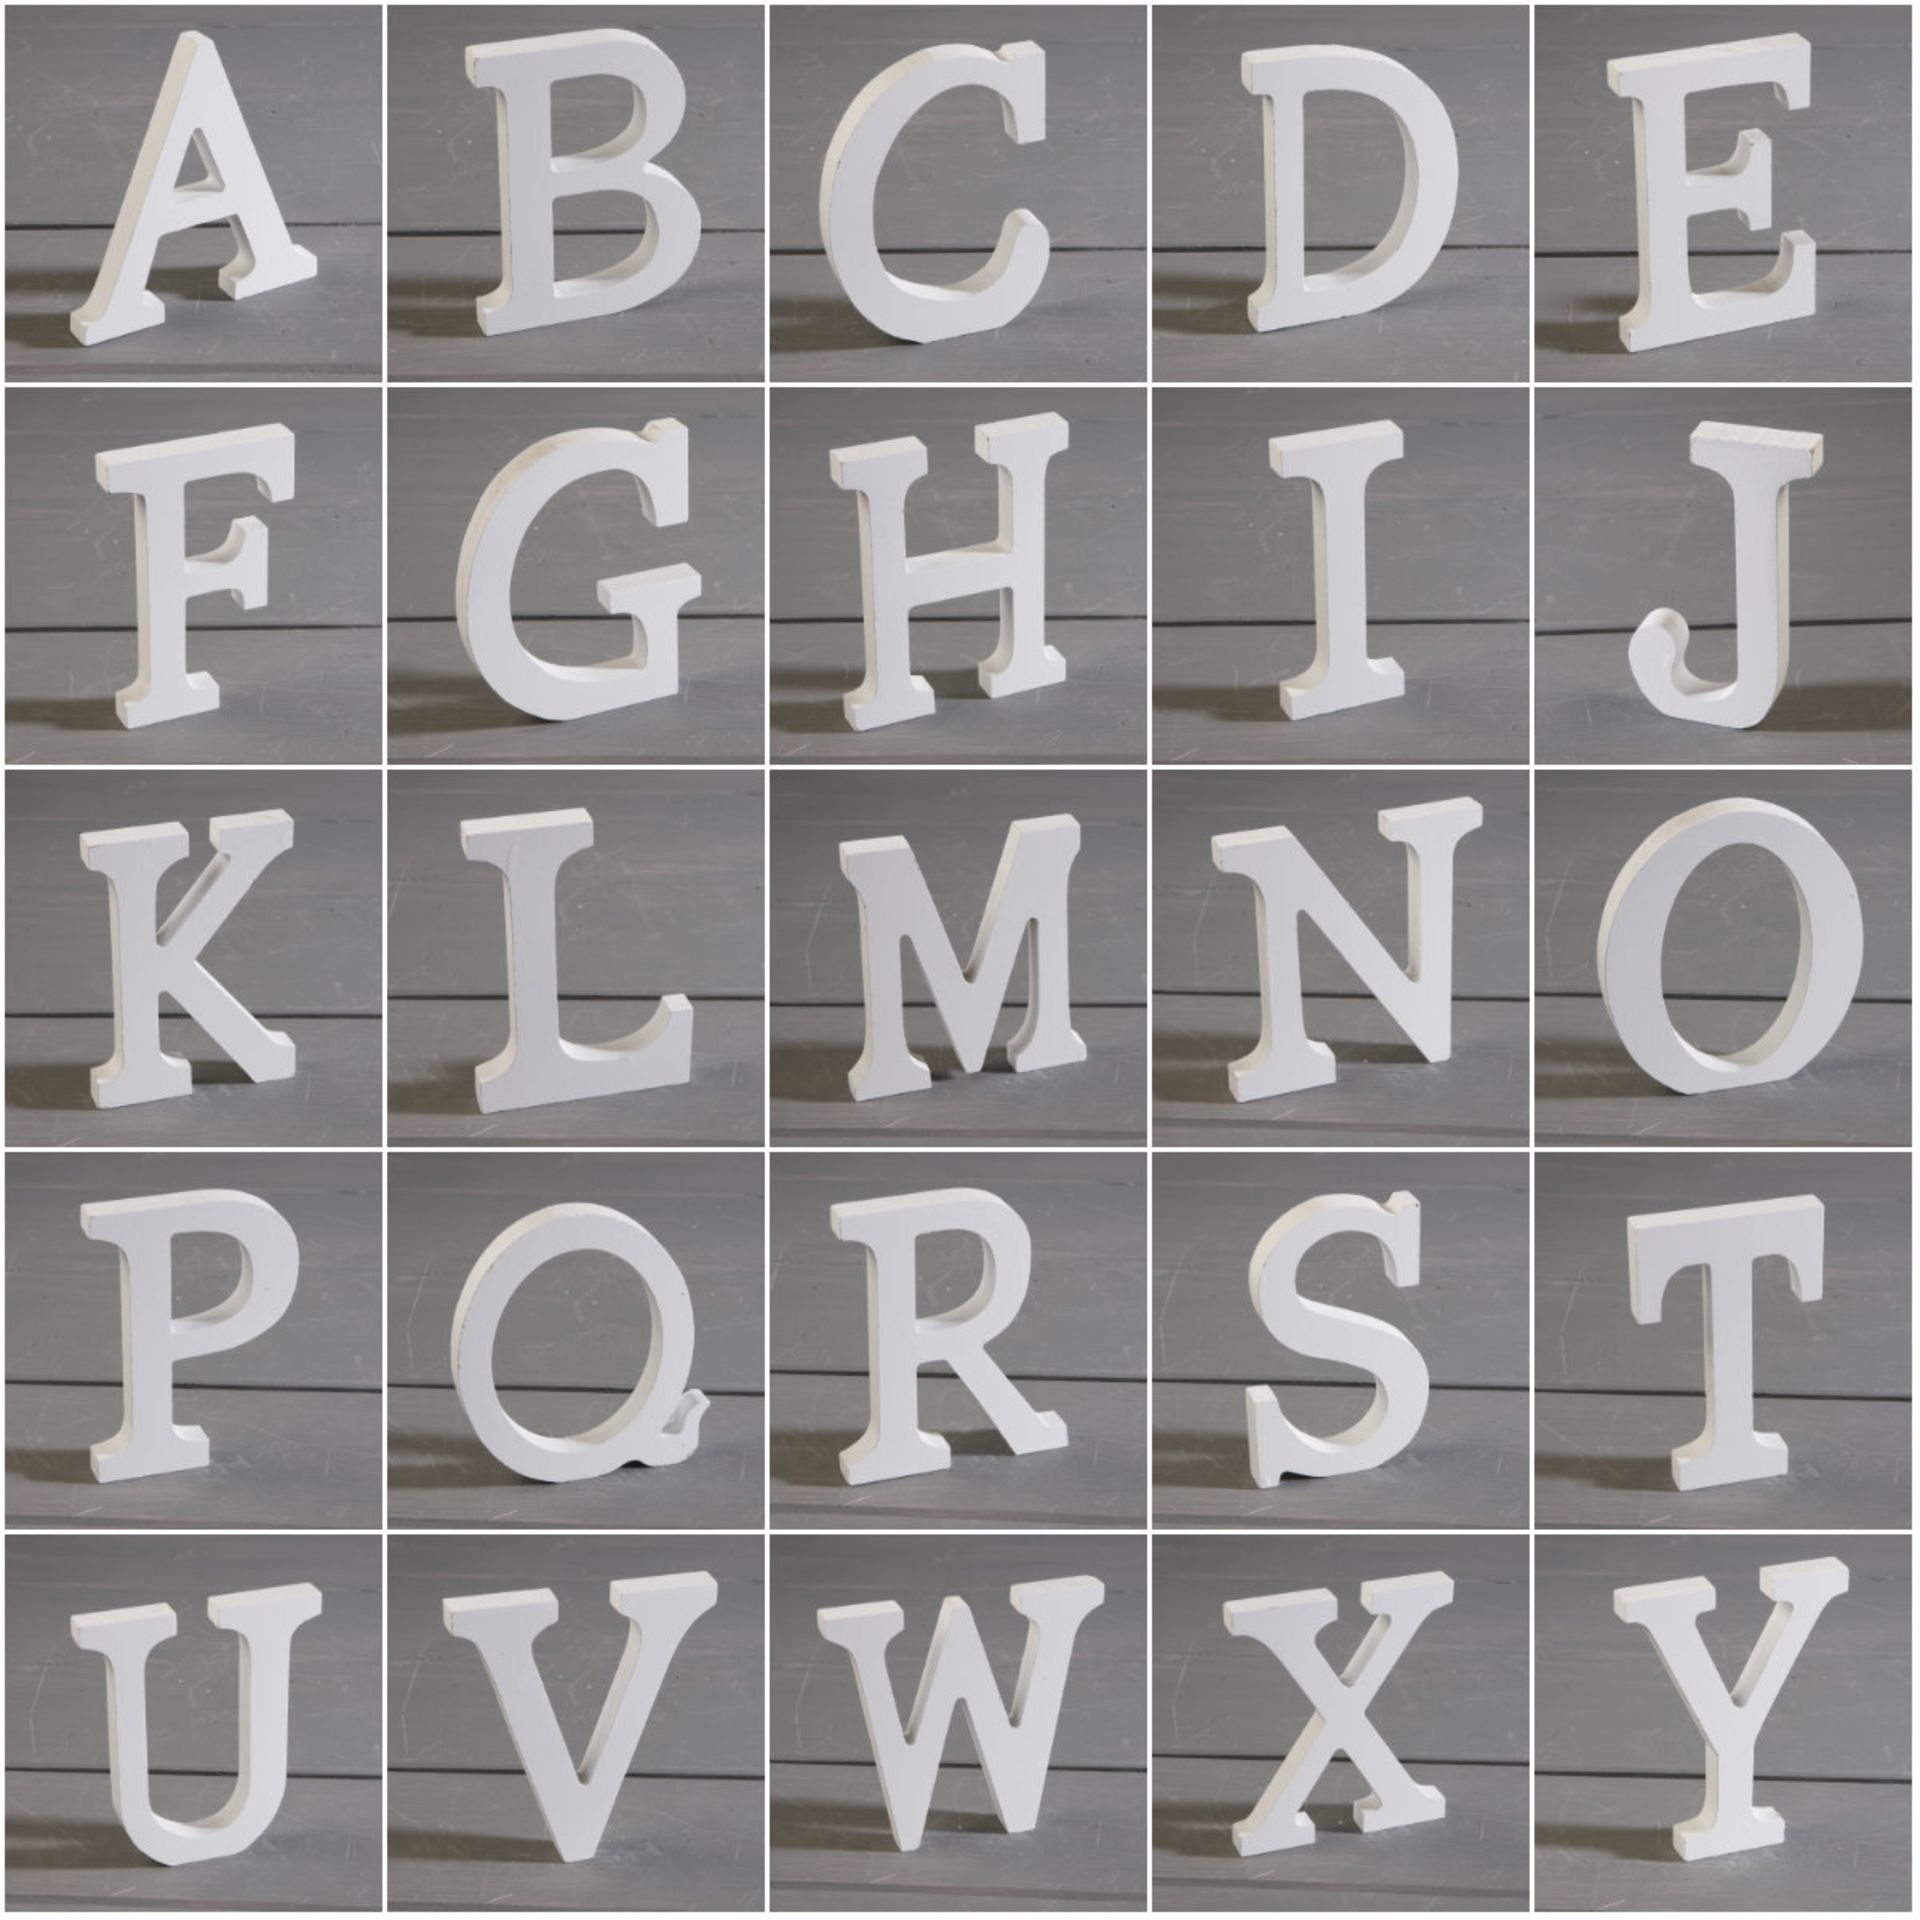 6,579 x 11cm White Wooden Free-Standing Letters. Alphabet and Ampersands